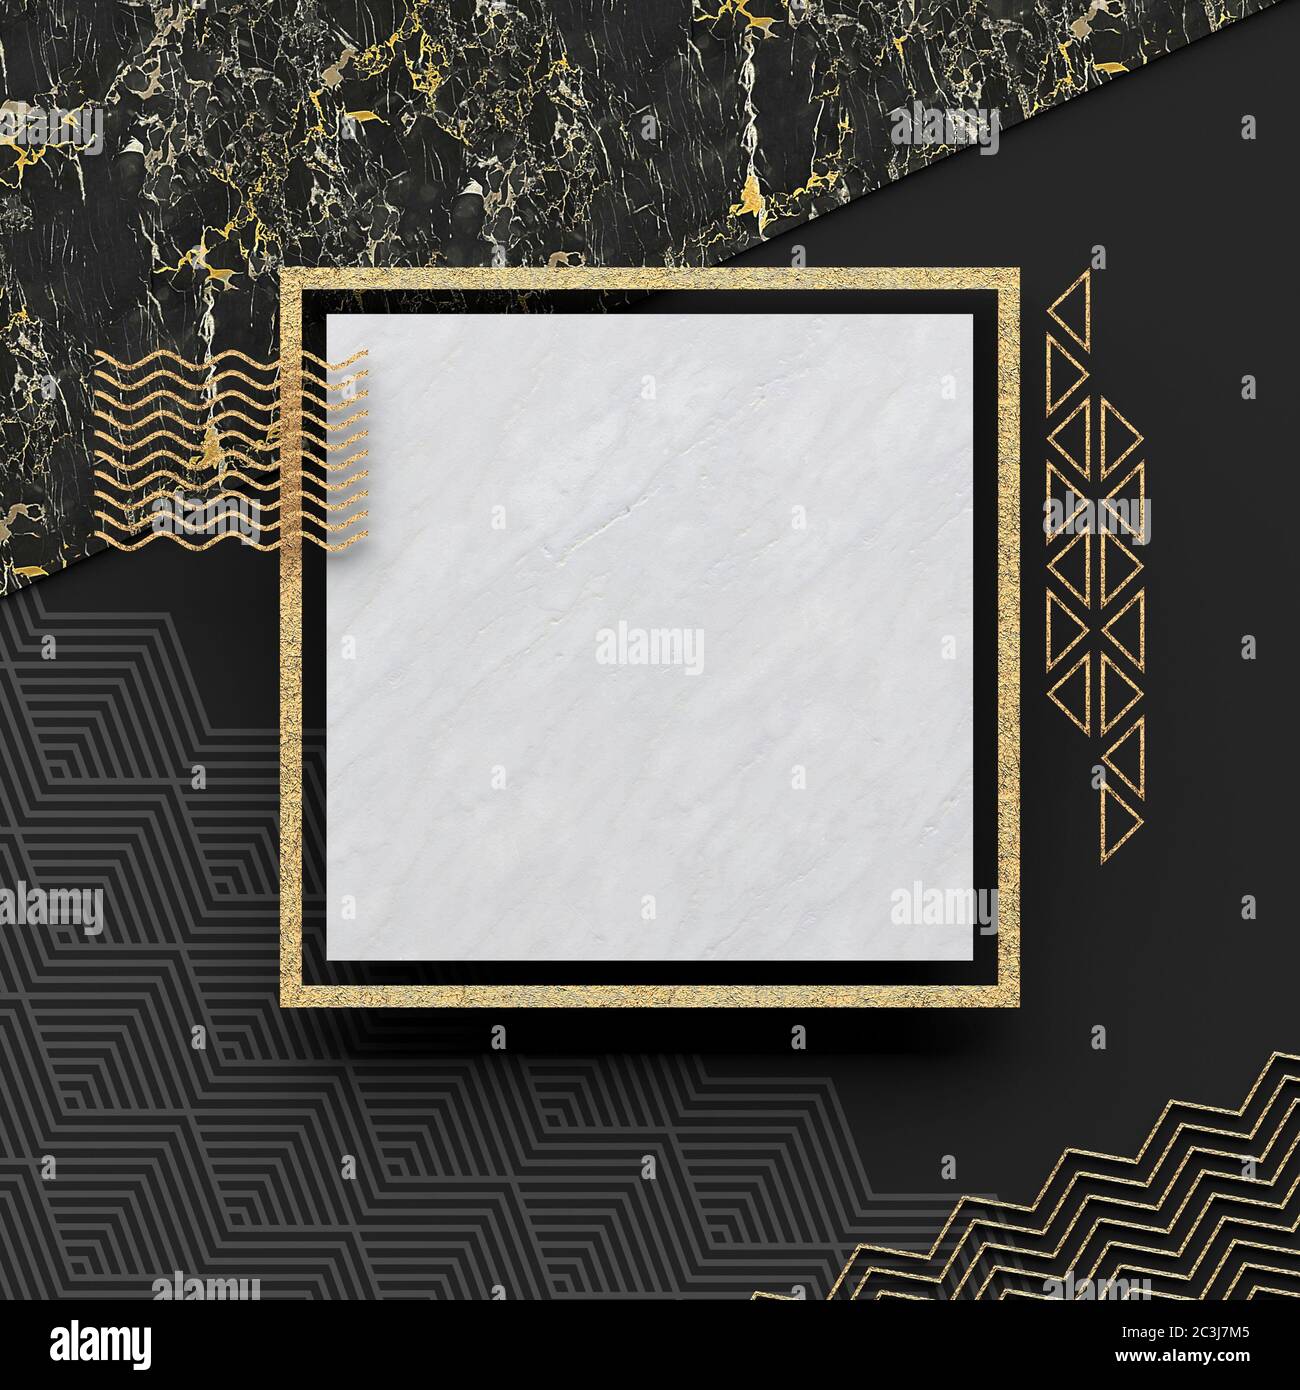 A square border frame on white marble stone with a dark background and textured gold elements. Copy space. Abstract geometric composition. 3D render. Stock Photo